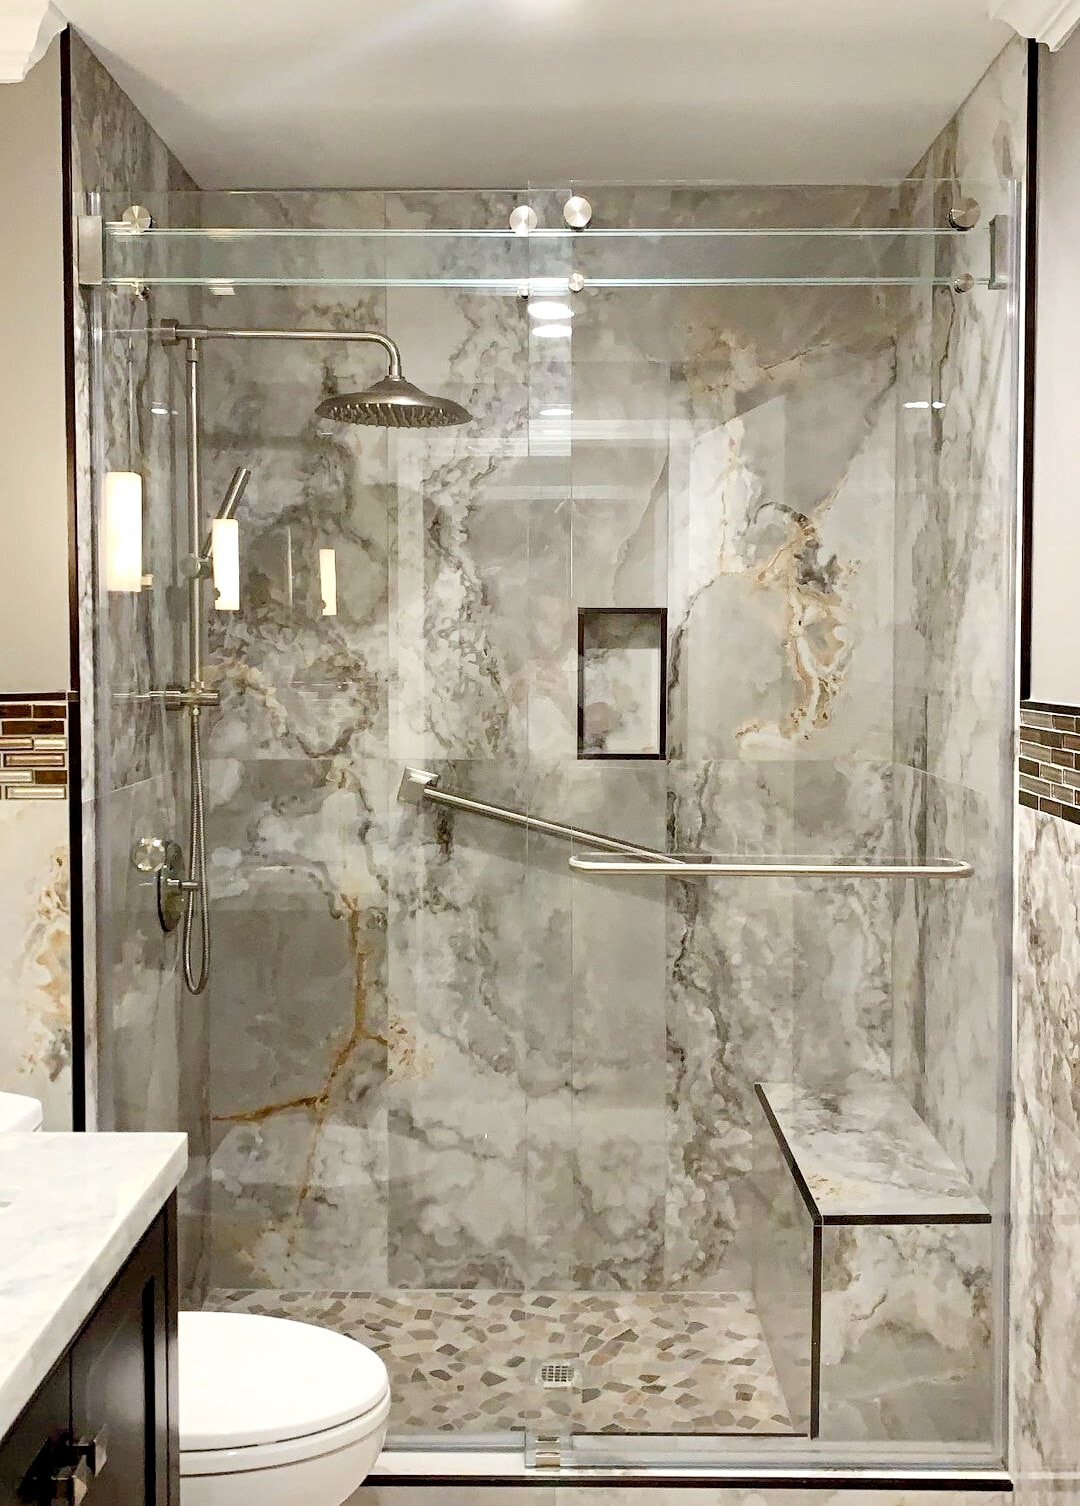 Phantom slider from 310 Tempering. The glass bar across the top is triple laminated for safety! All glass is low iron to ensure the clearest, most seamless sliding shower.